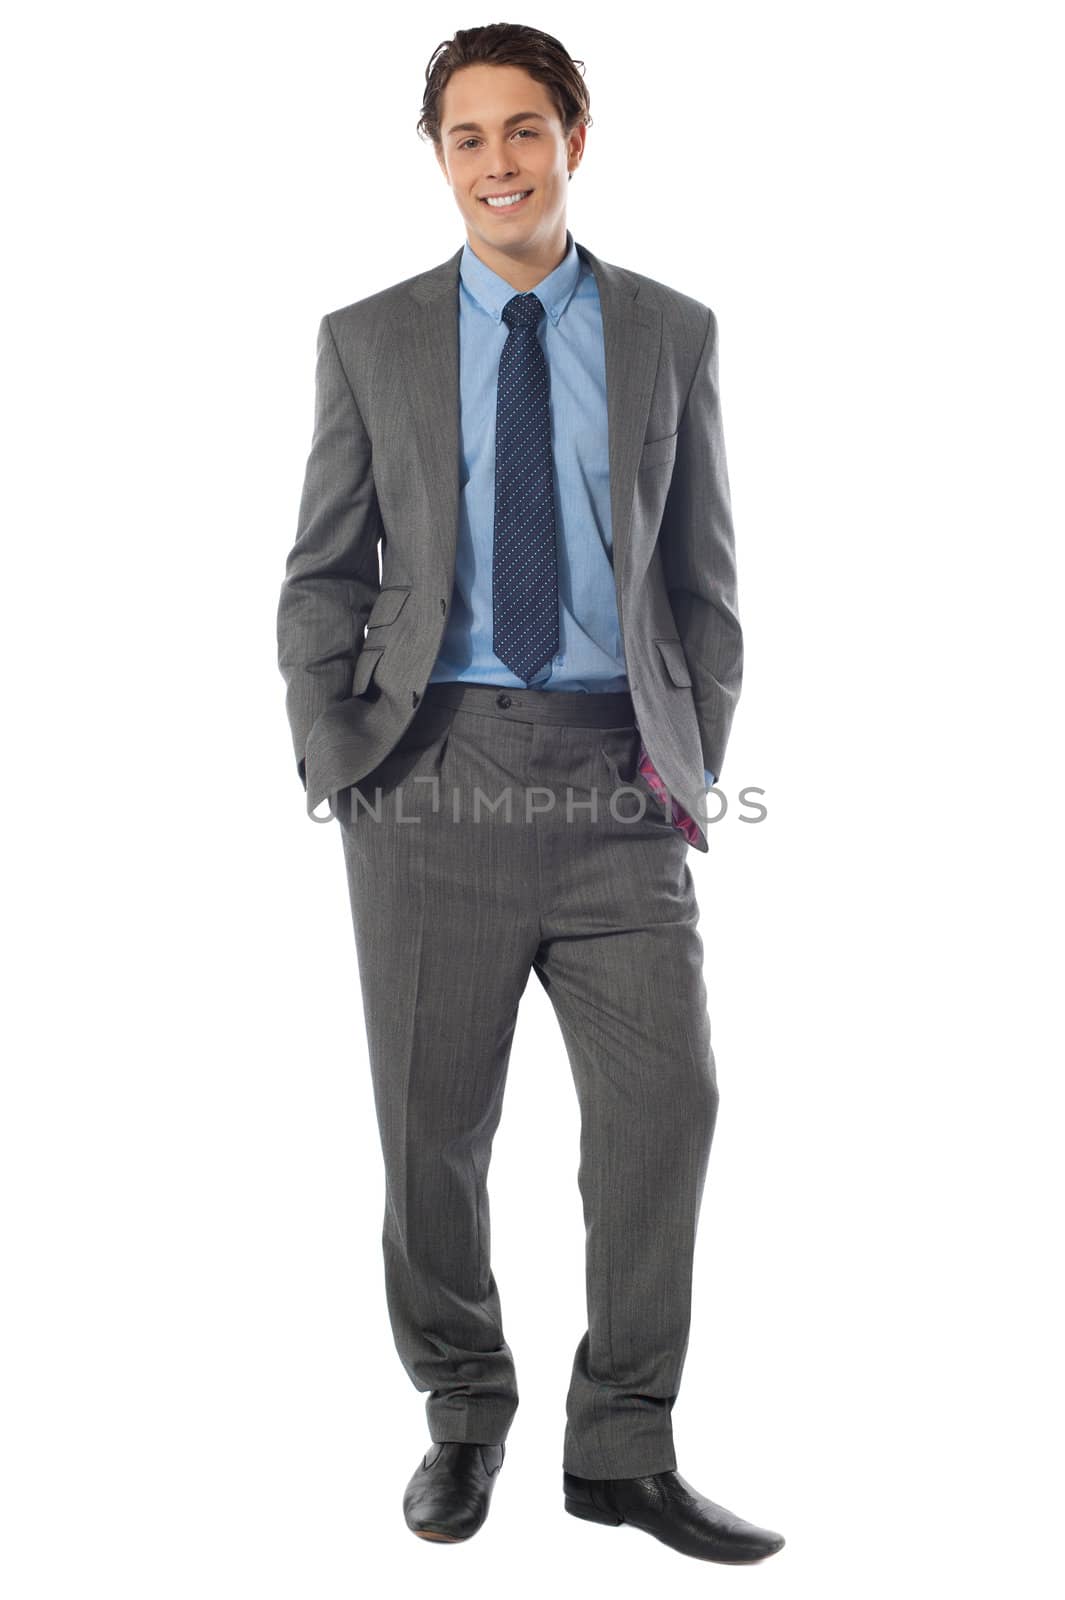 Portrait of happy smiling young businessman by stockyimages